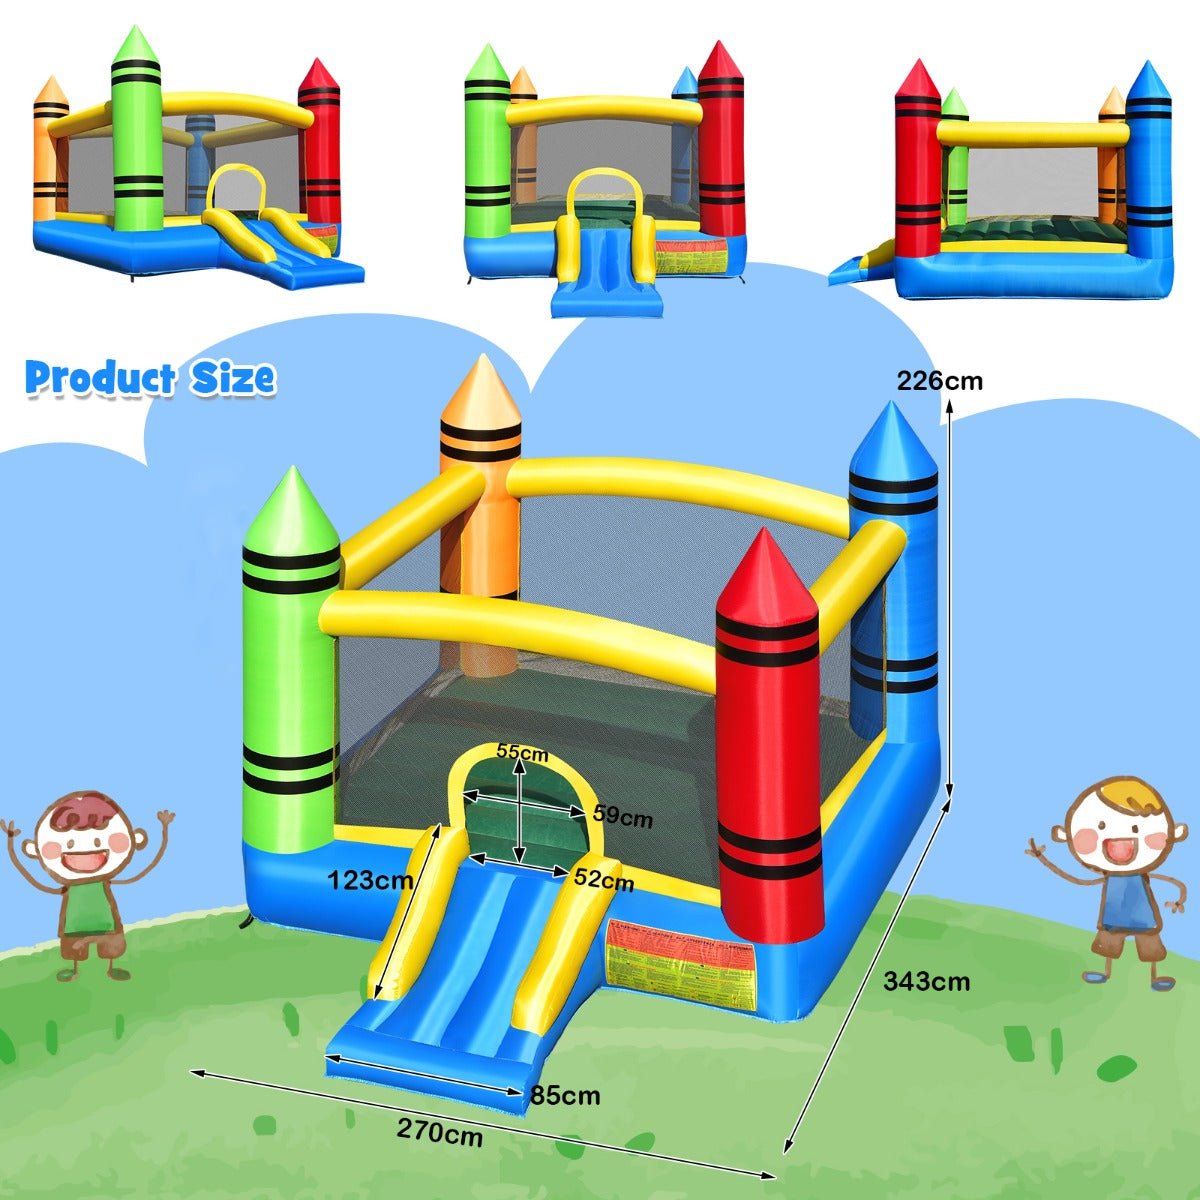 Wholesome Delight: Kids Inflatable Bounce House with Playful Slide